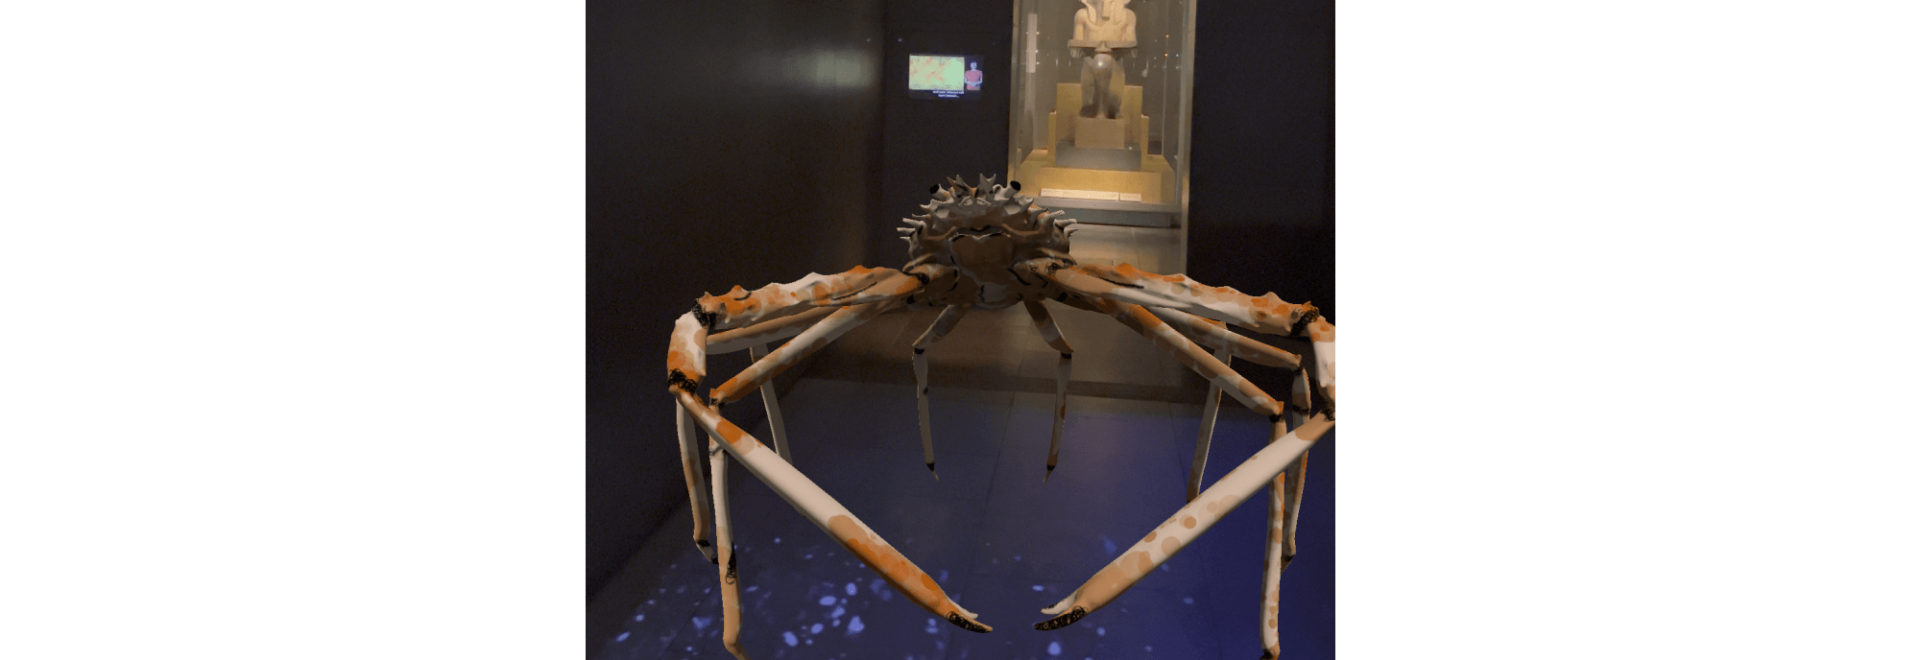 An AR Spider crab is creeping about in the Egyptian gallery.